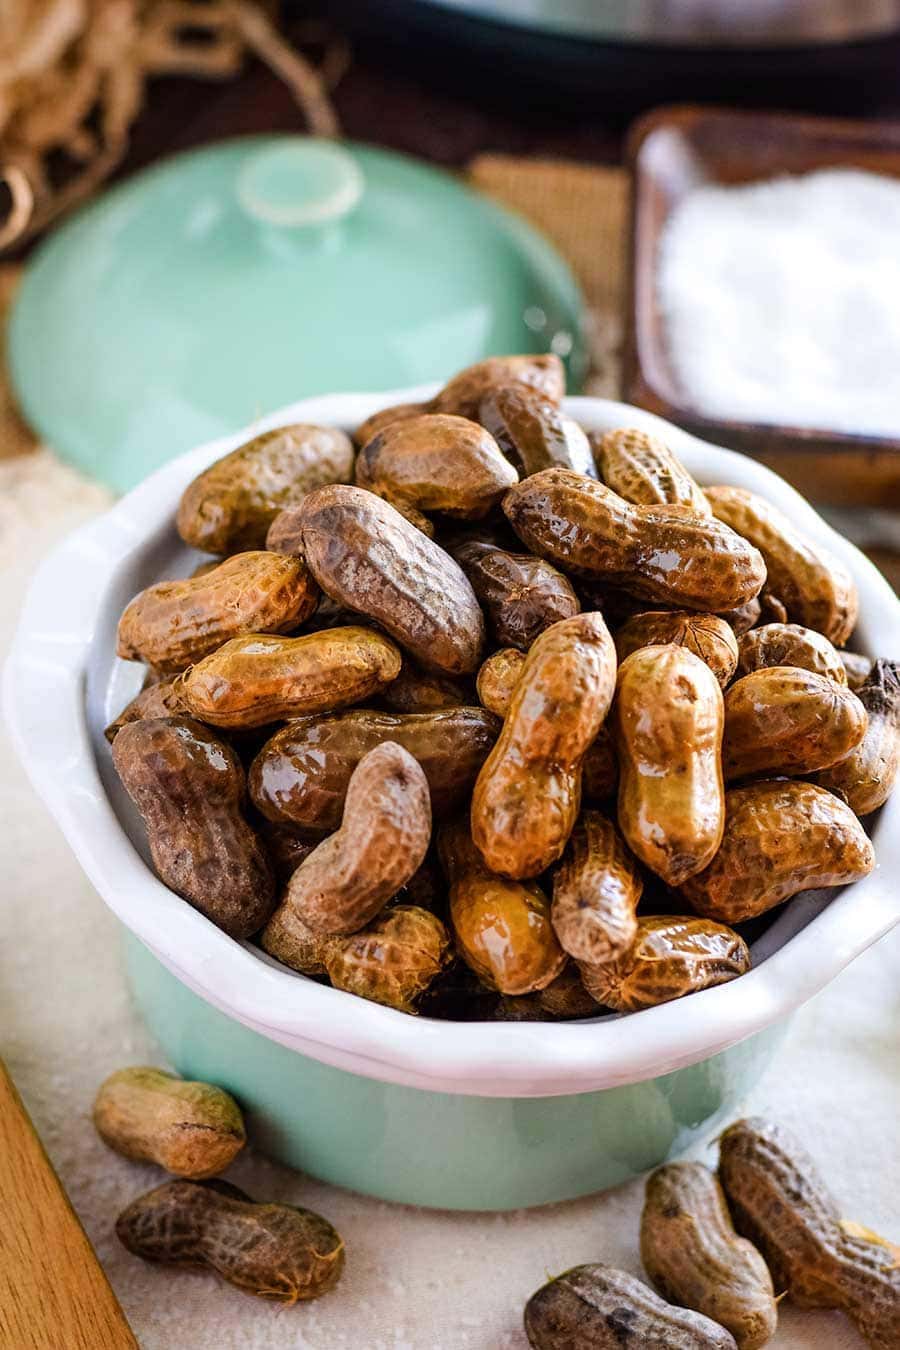 Boiled peanuts in a green bowl.